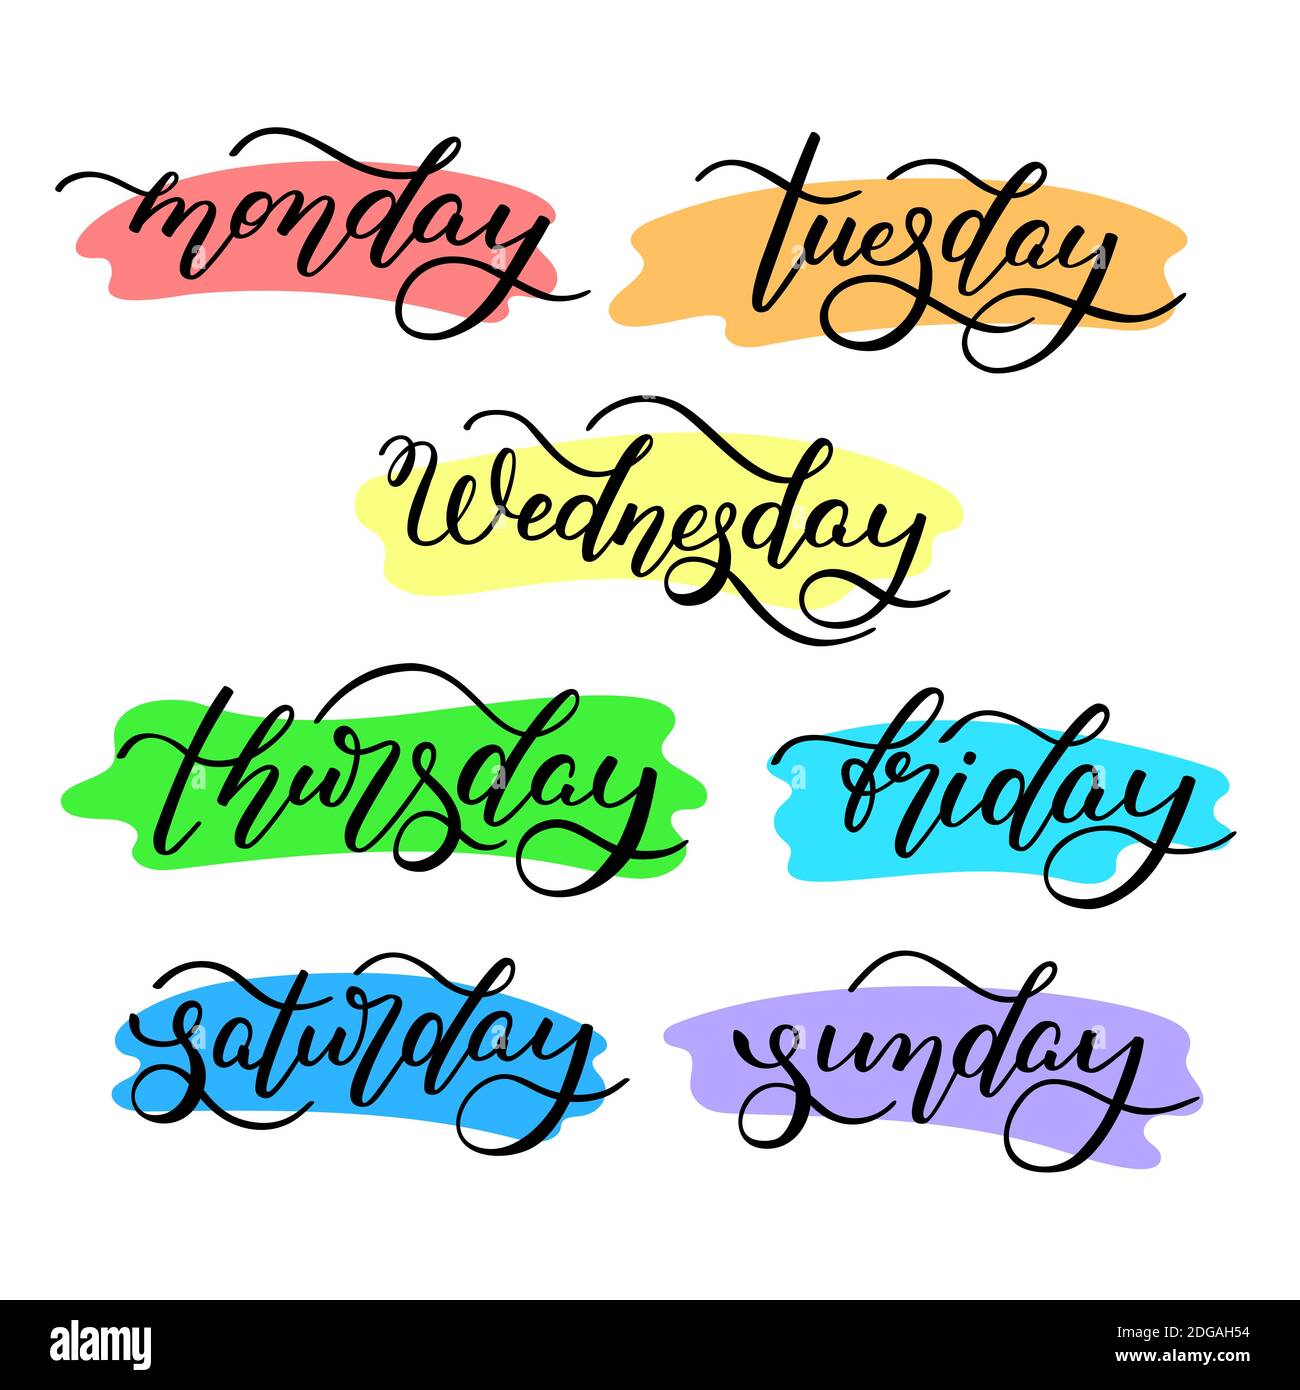 Handwritten days of the week  Lettering, Planner pages, Thursday